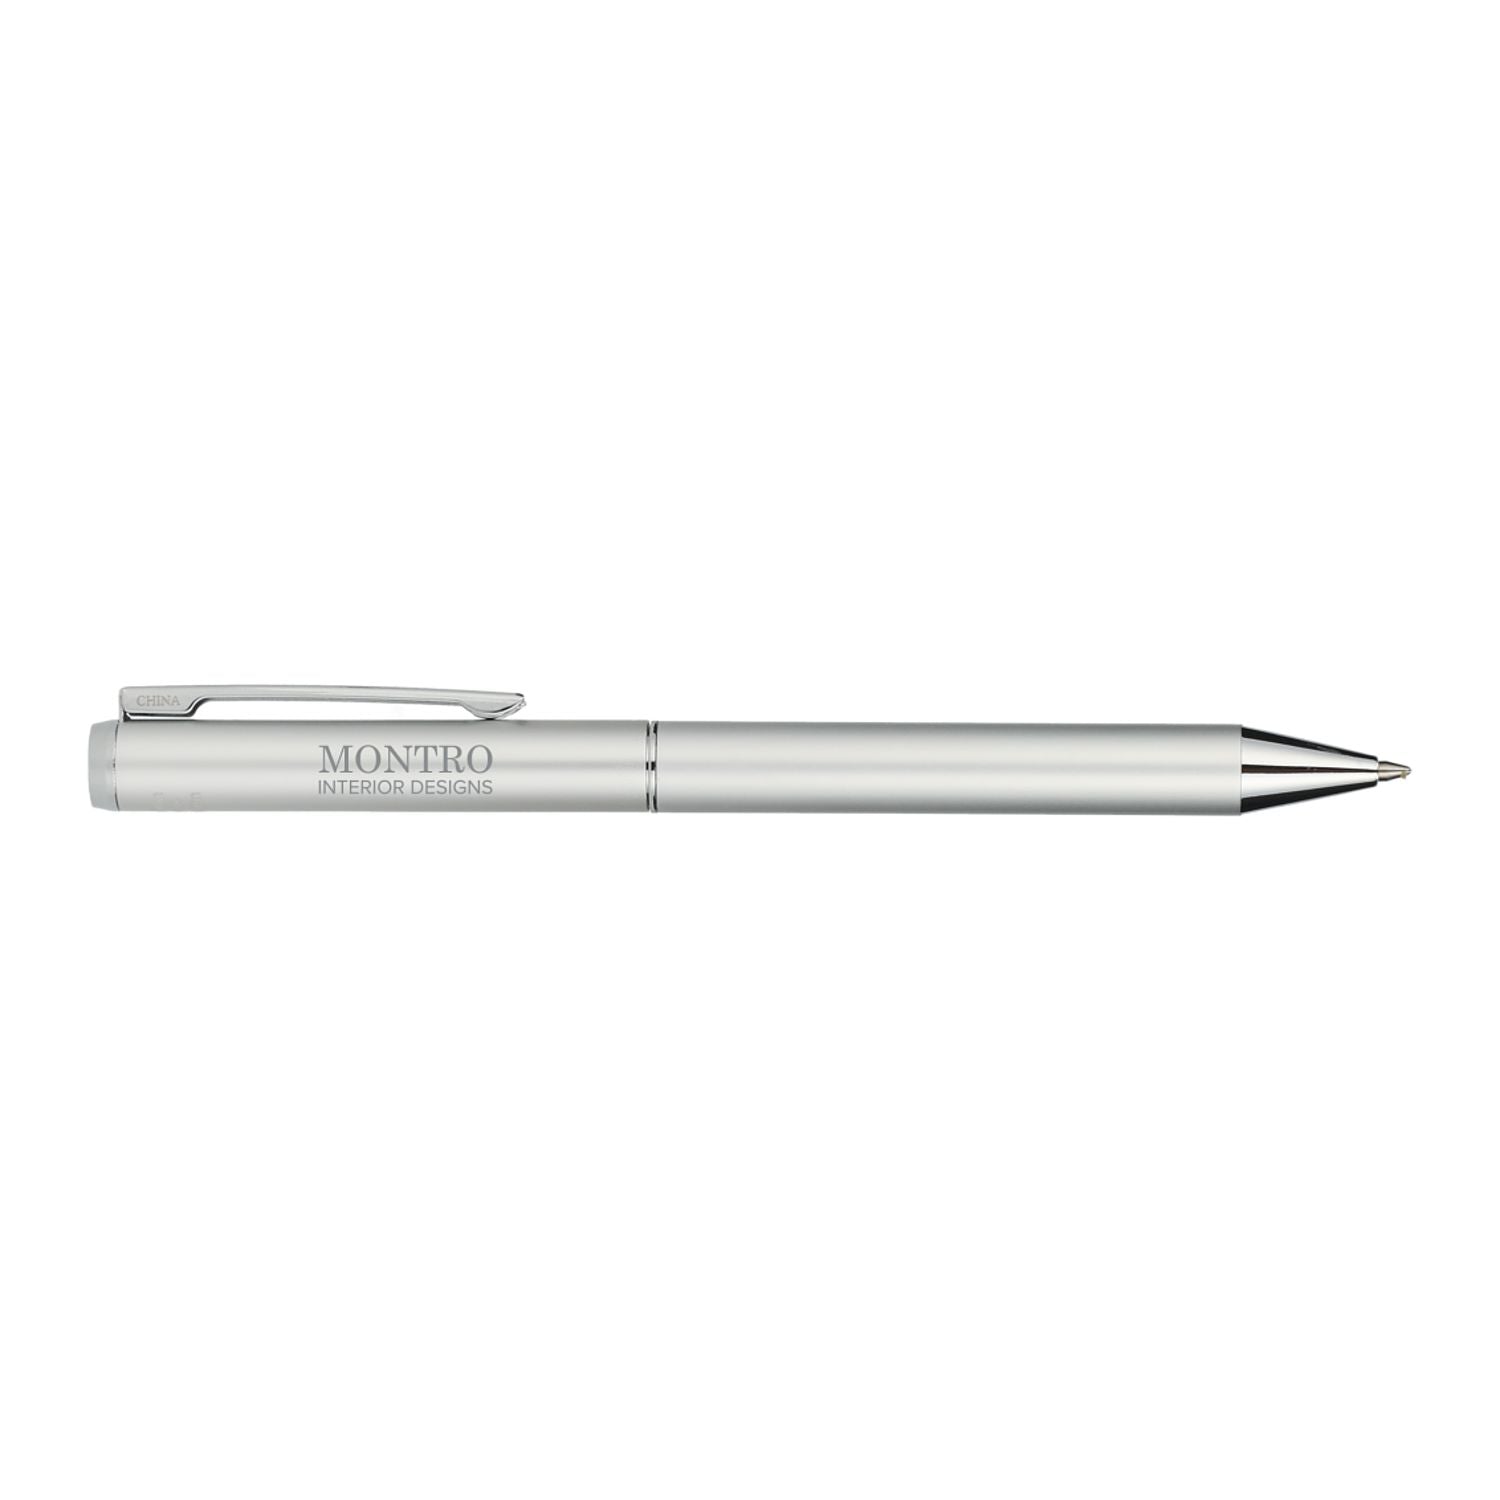 Customized recycled aluminum ultra gel ballpoint pen in silver.